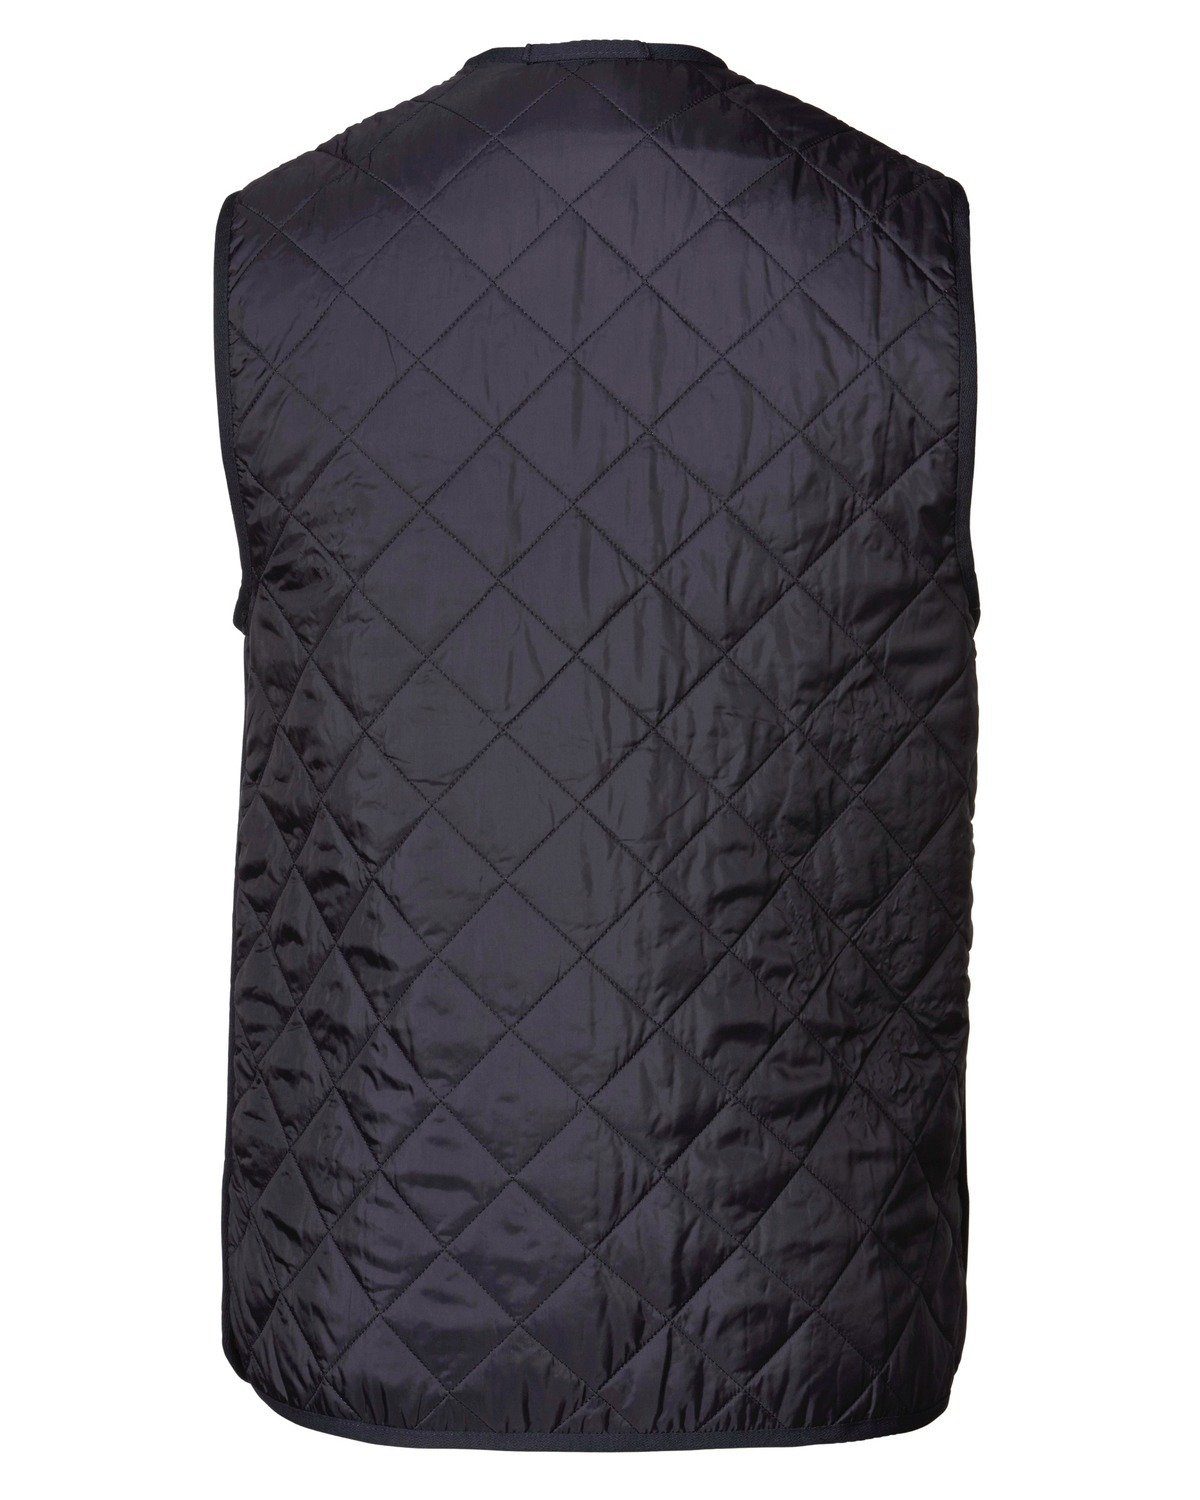 Barbour Steppweste Weste Quilted Navy